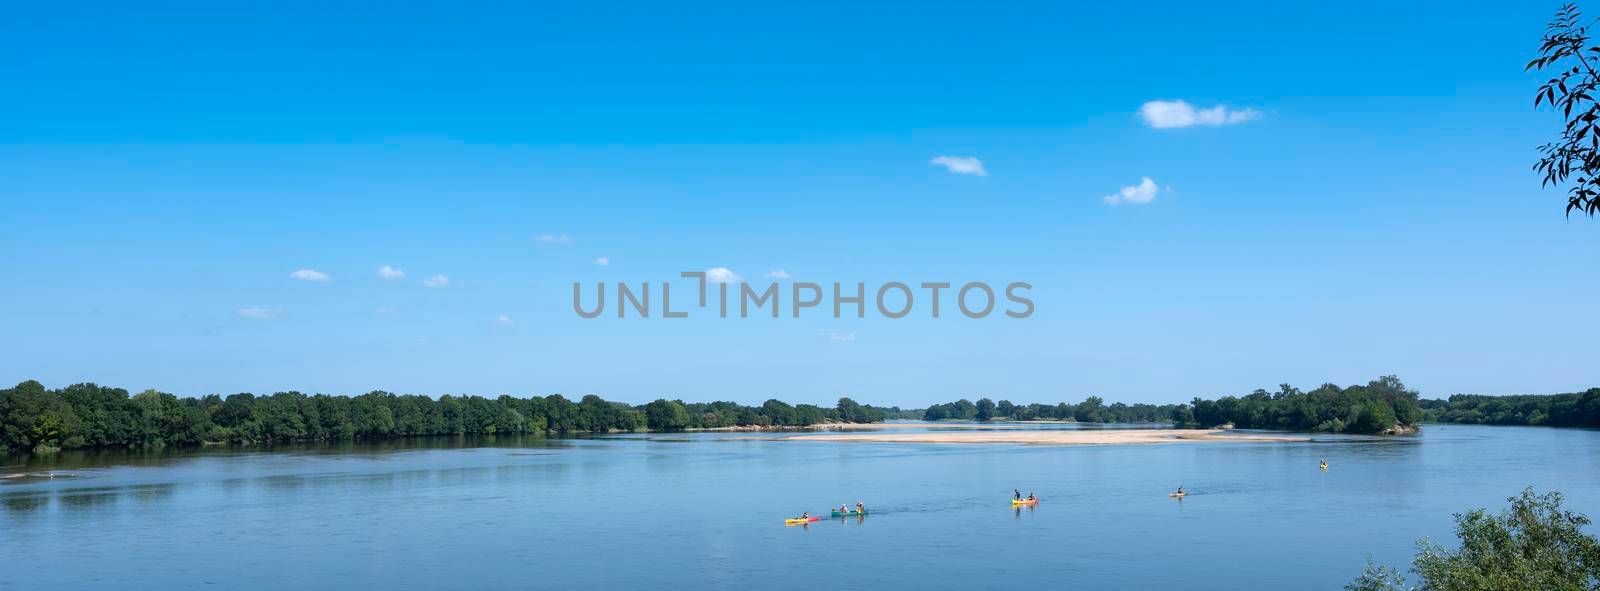 colorful canoes on river loire in france between tours and angers by ahavelaar